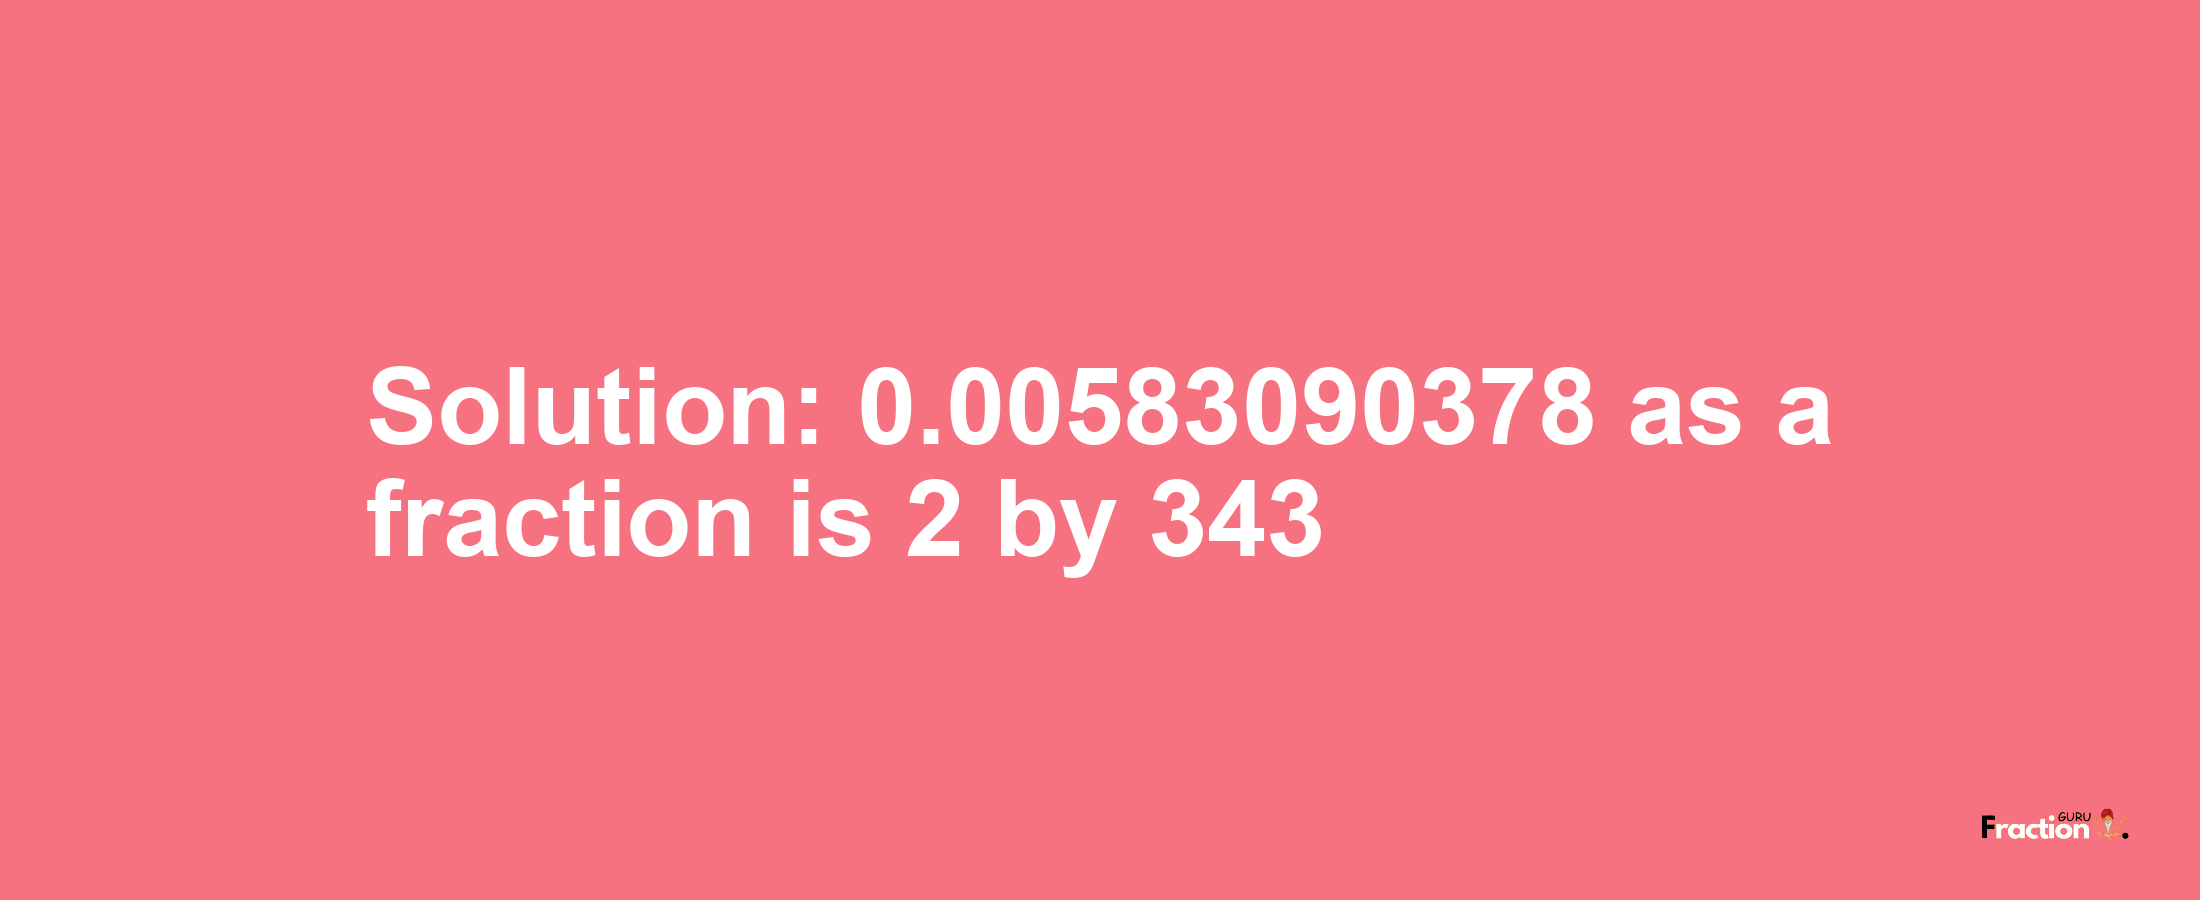 Solution:0.00583090378 as a fraction is 2/343